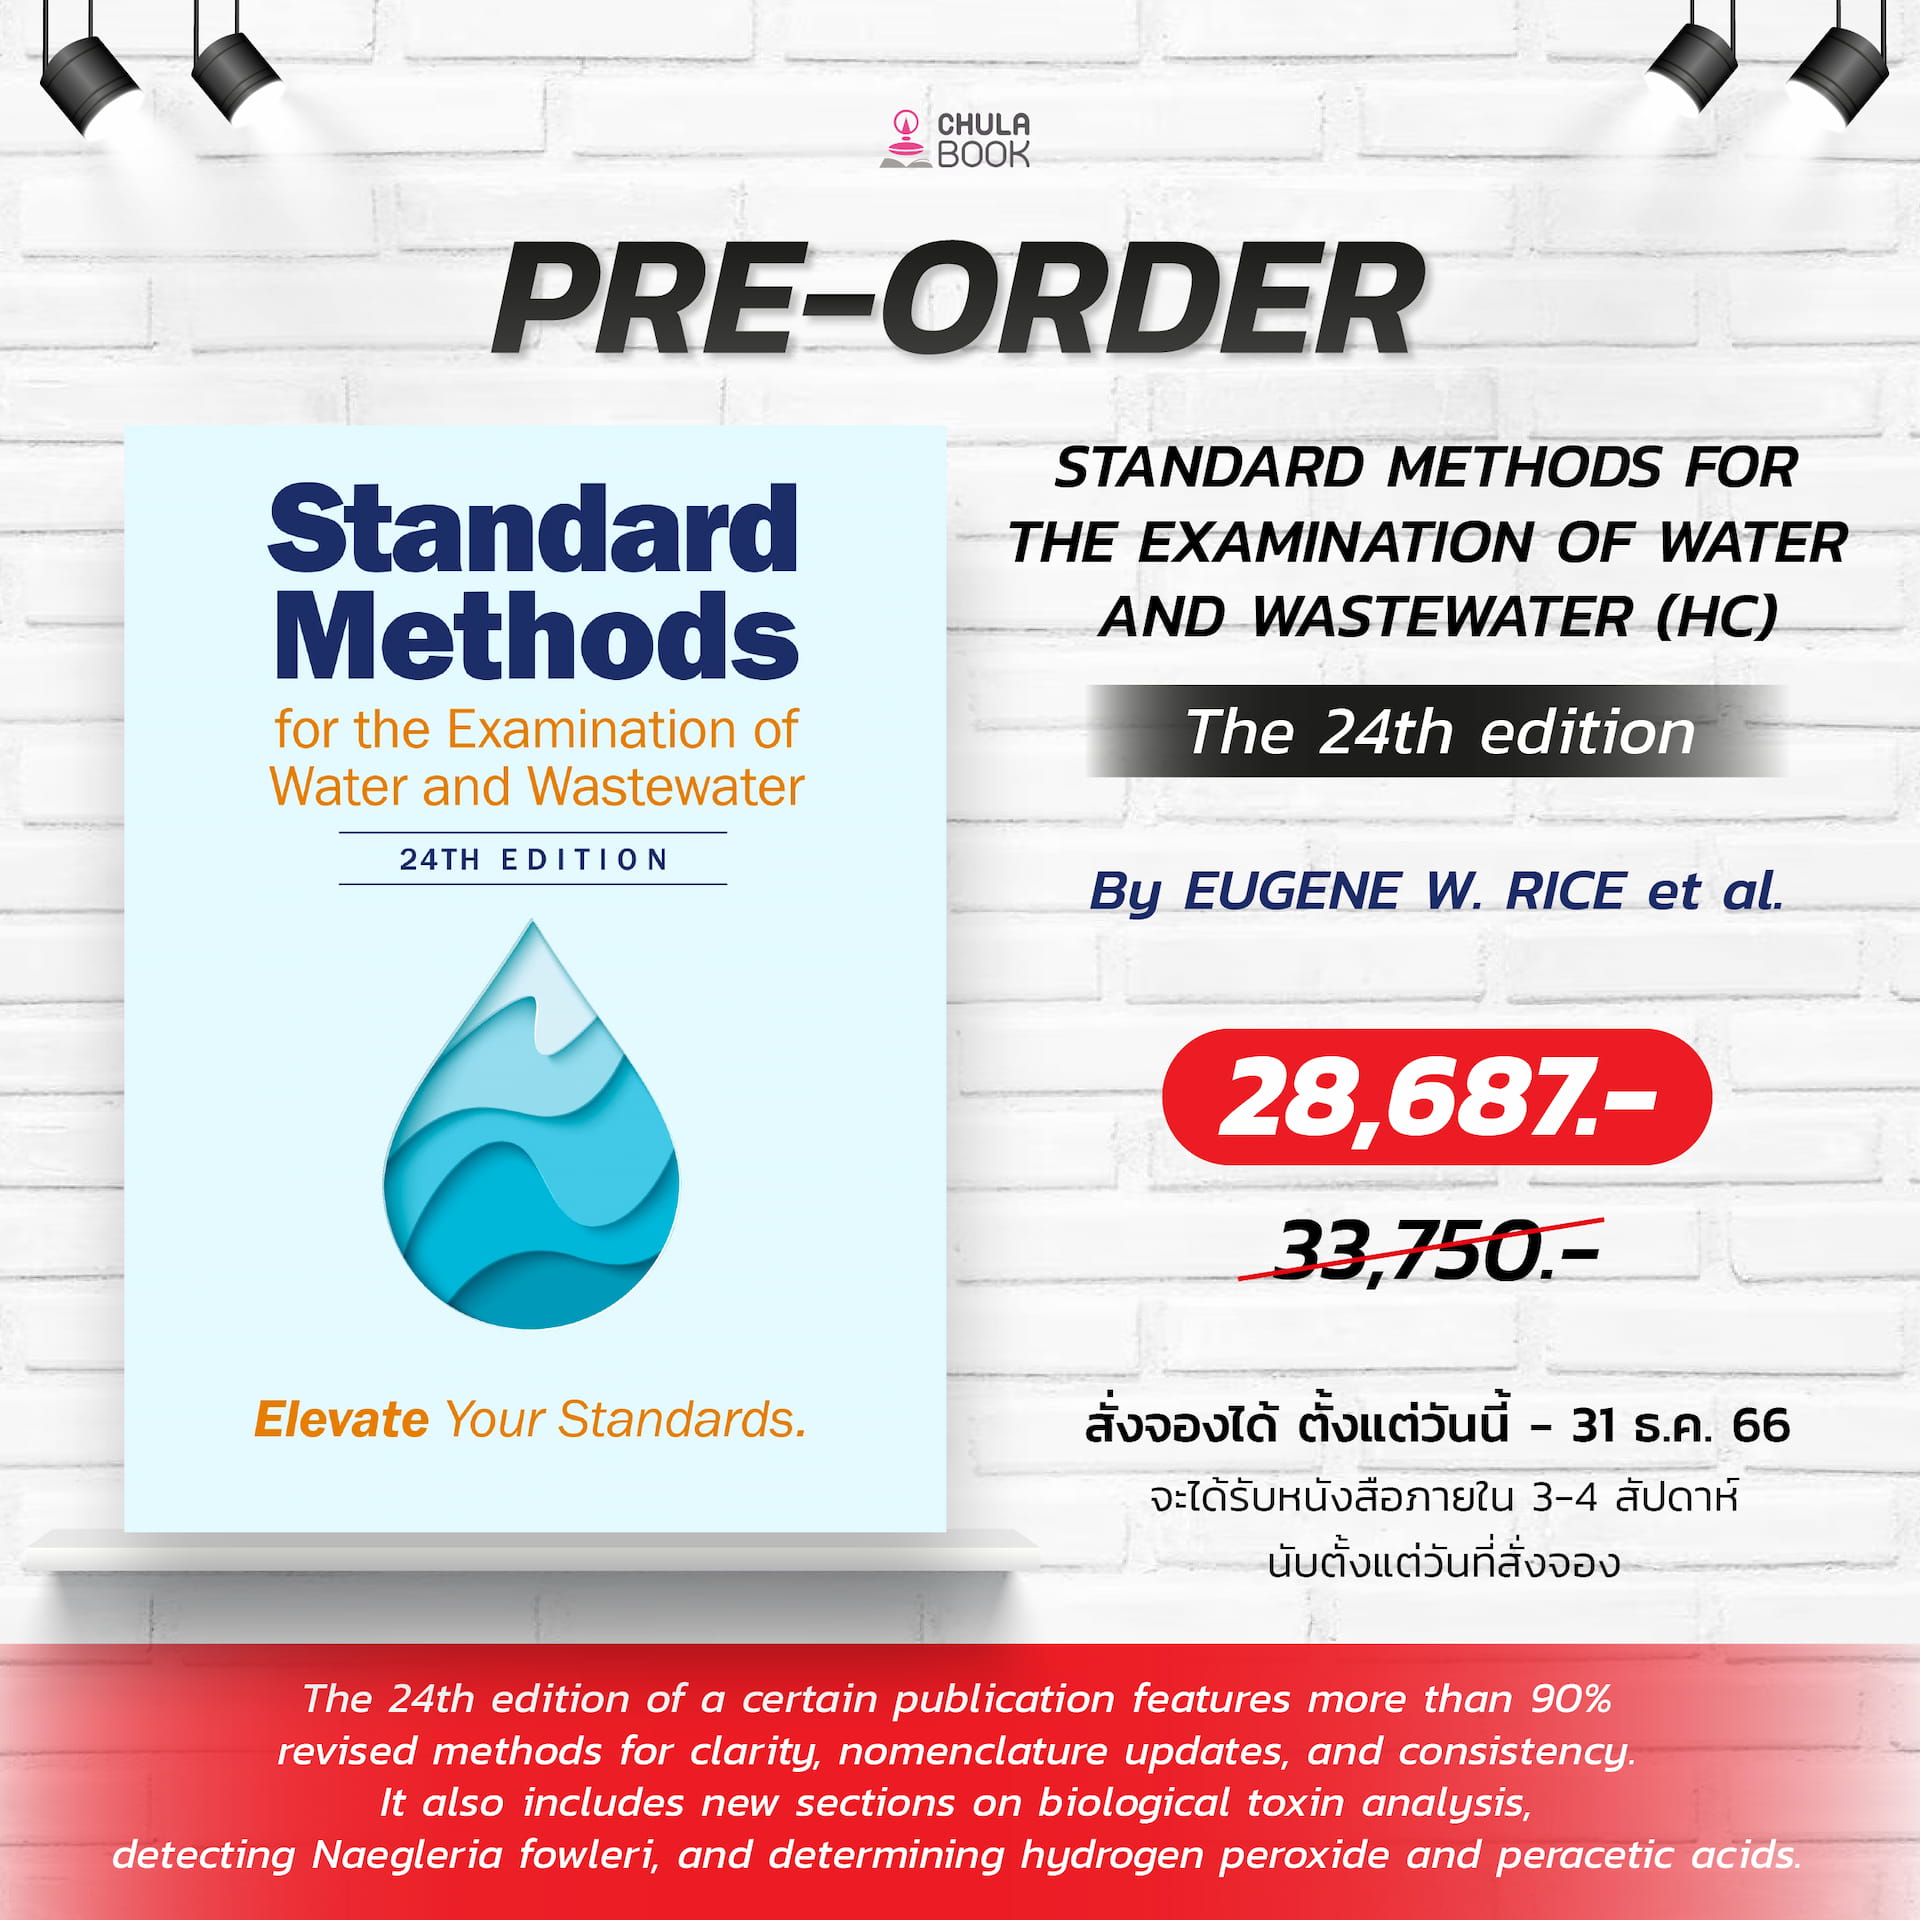 STANDARD METHODS FOR THE EXAMINATION OF WATER AND WASTEWATER (HC)